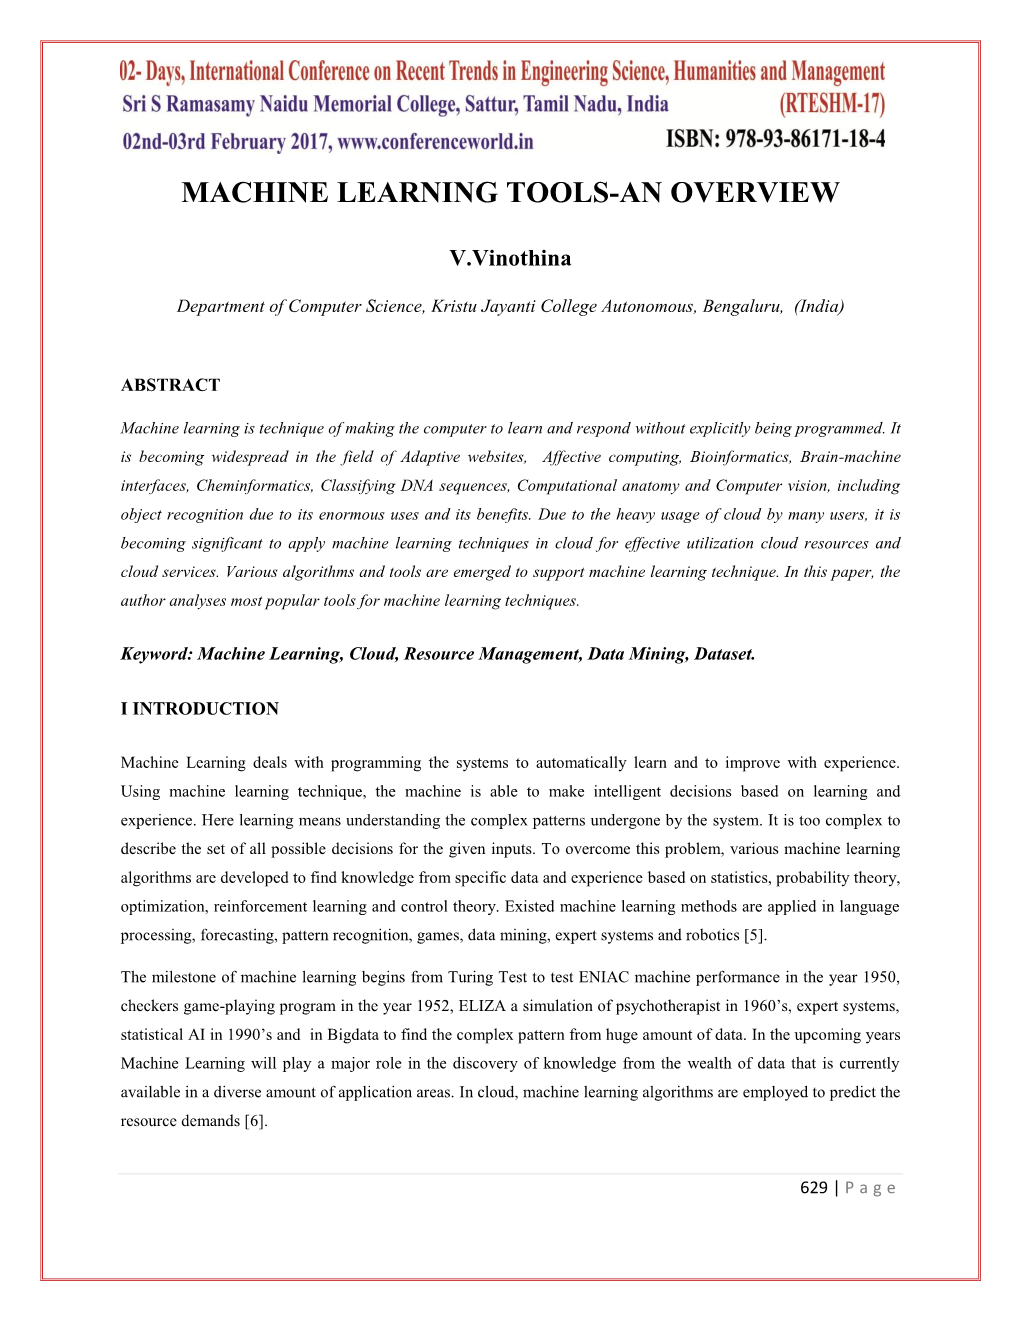 Machine Learning Tools-An Overview